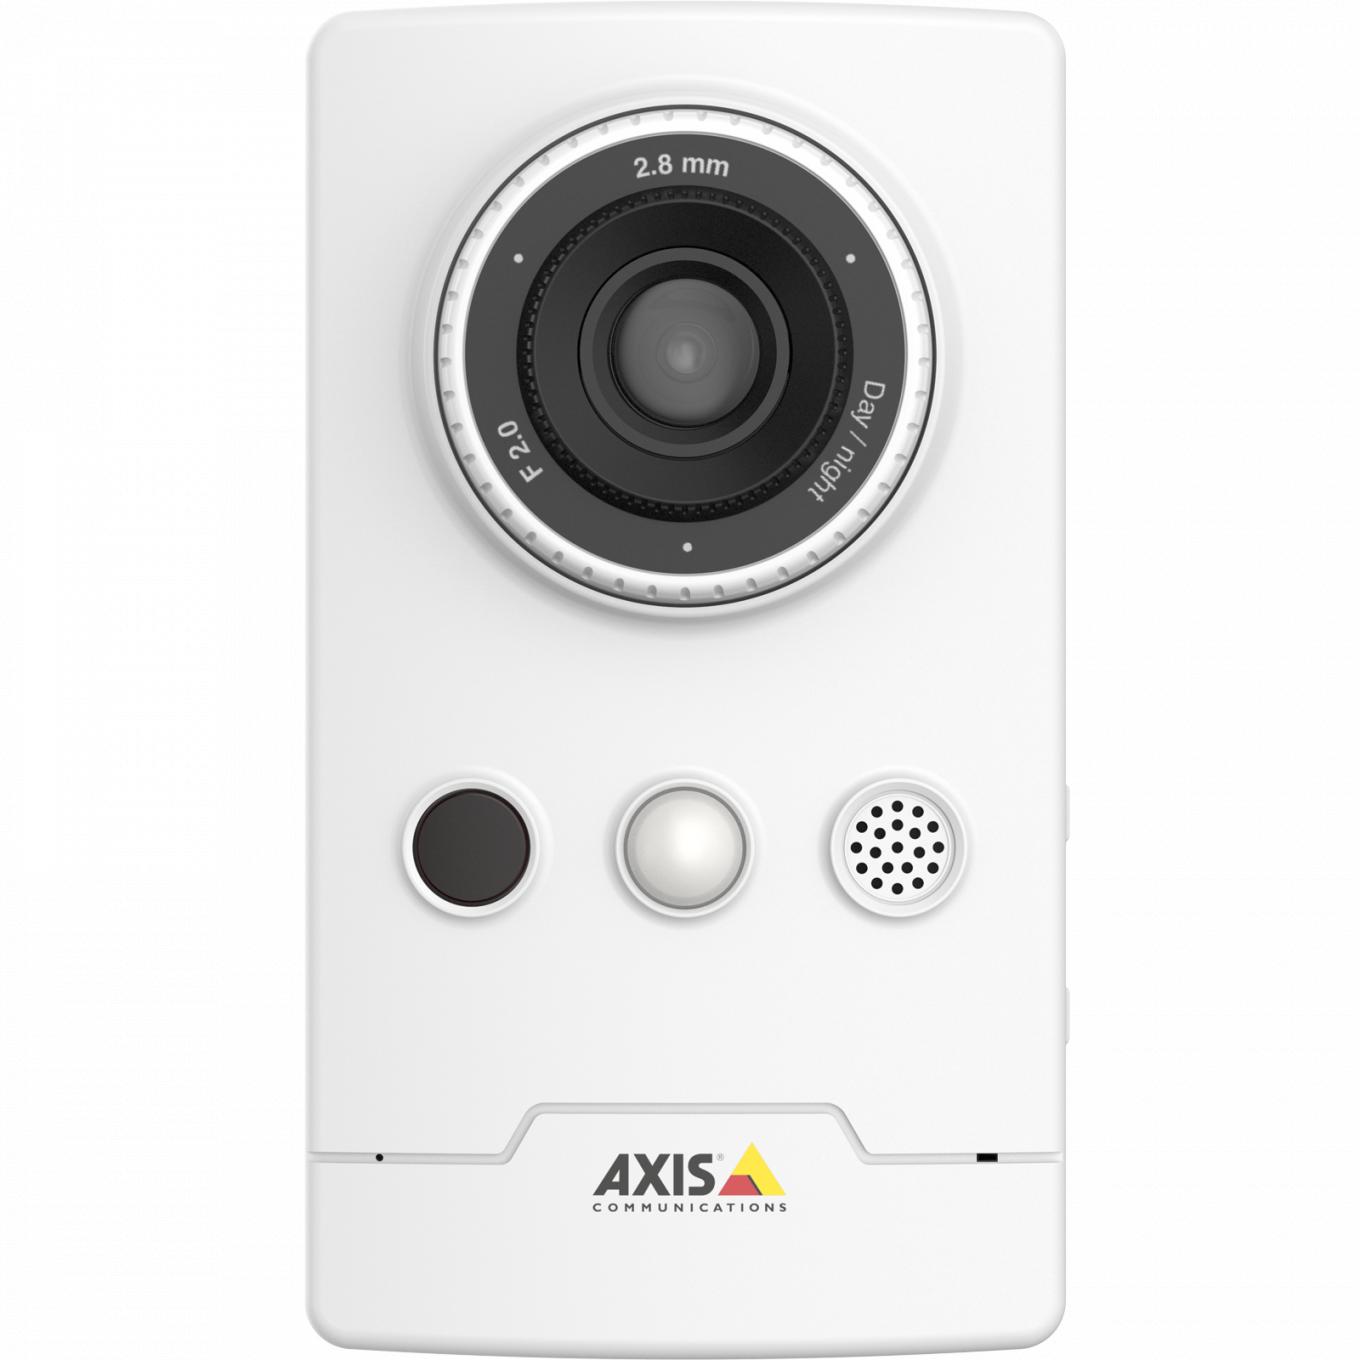 AXIS M1065-L IP camera has built-in microphone and mini-speaker. The camera is viewed from its front. 